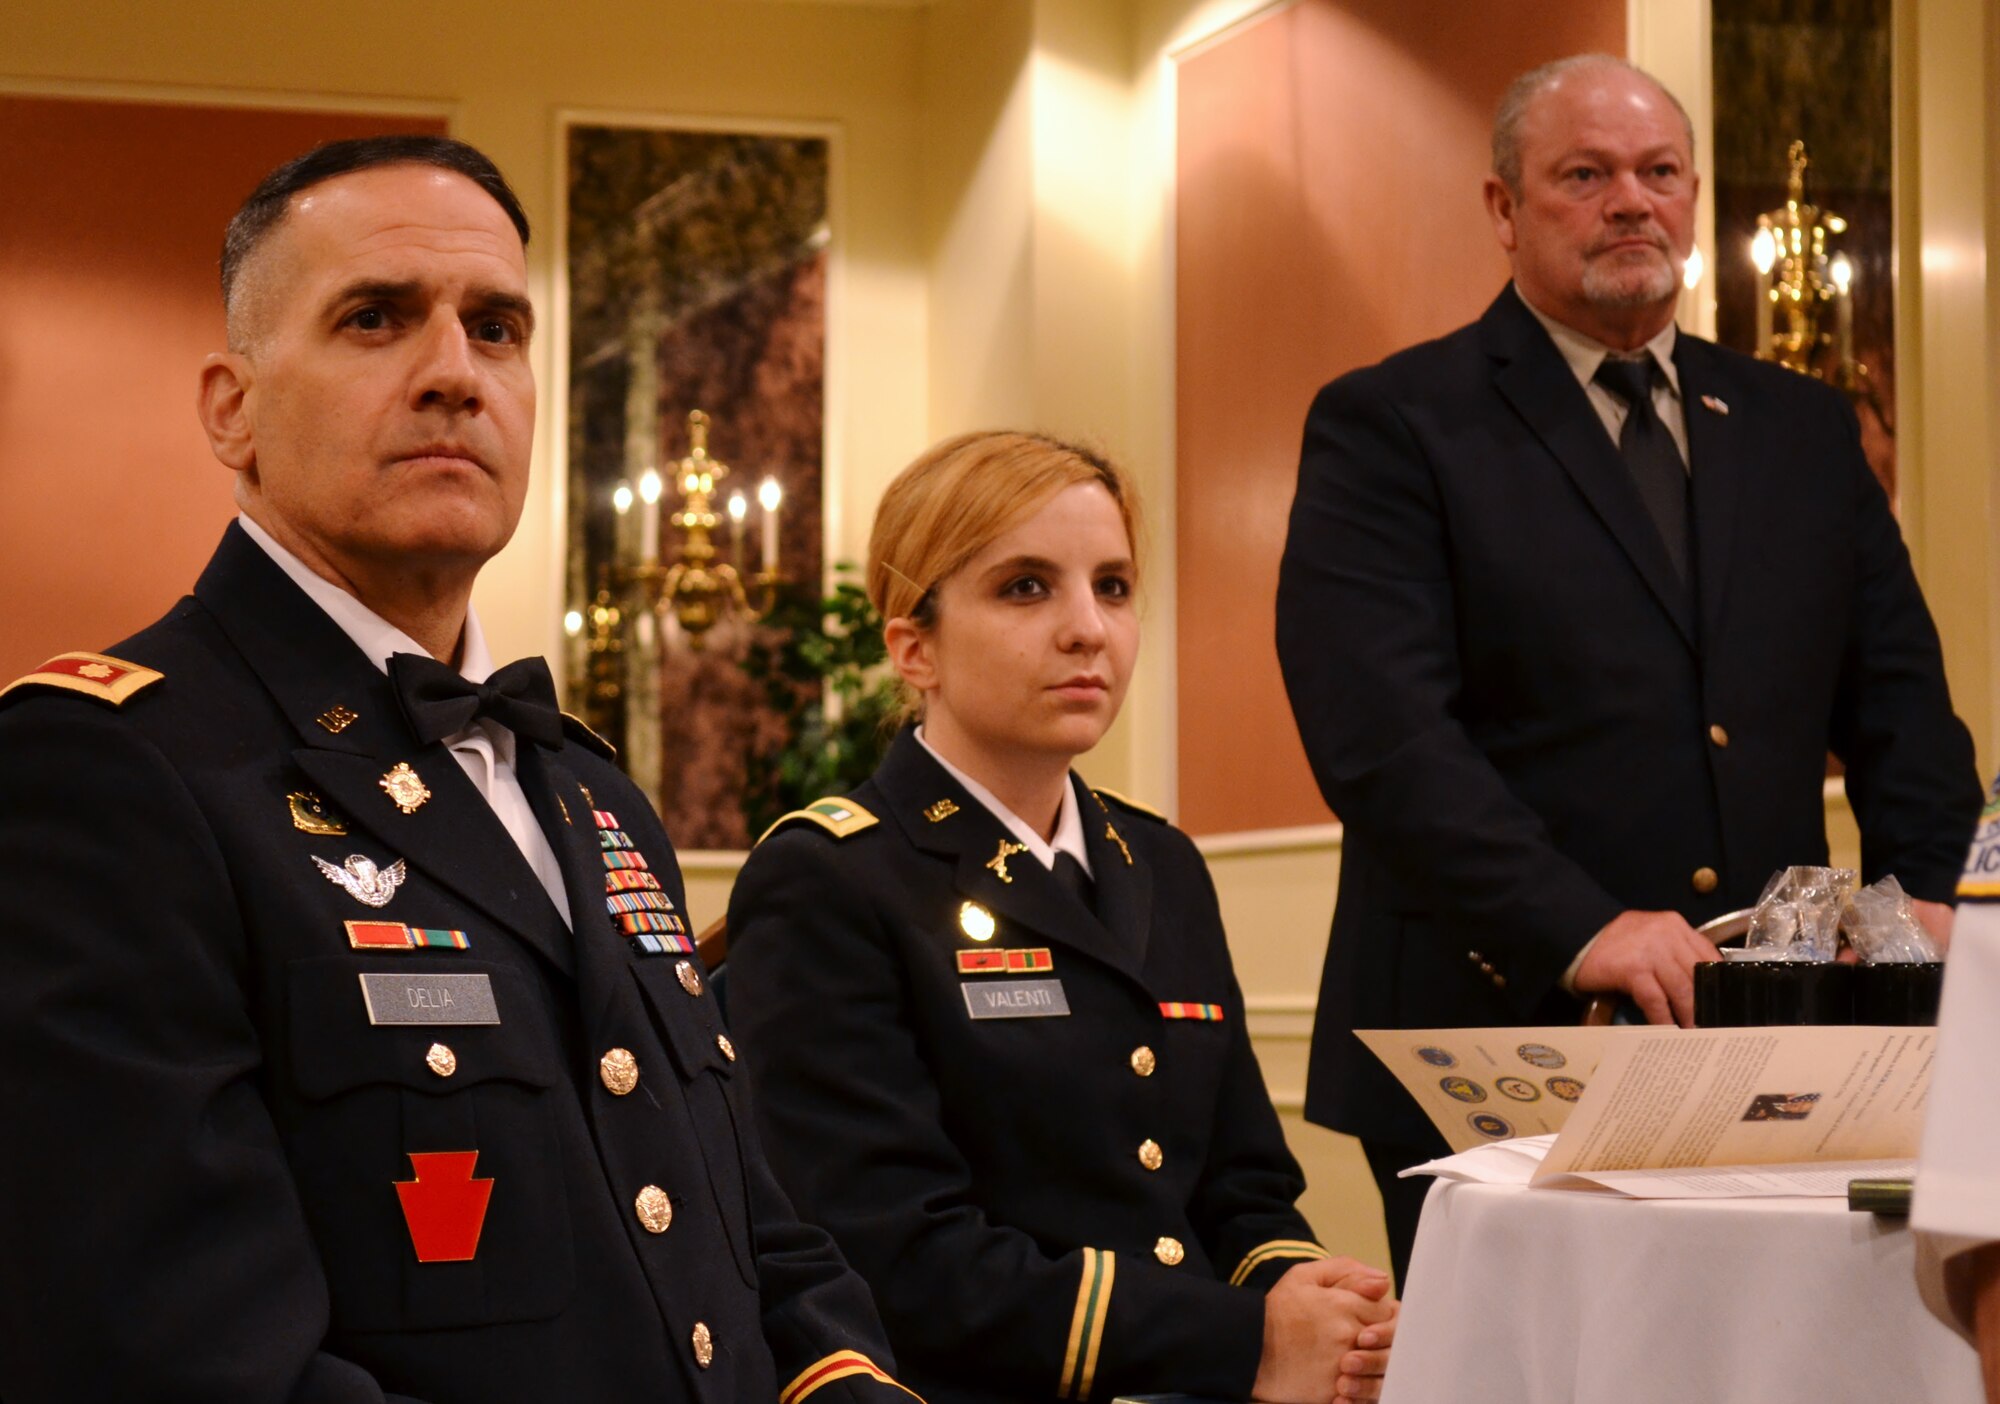 Army Maj. Anthony DeLia, of the Pa. National Guard, sits with fellow nominators and nominees at an Employer Support of the Guard and Reserve award ceremony in Horsham, Pa., June 14, 2016. Army and Air National Guardsmen, along with members of the multi-branch reserve components, attended alongside the civilian employers they nominated for outstanding military support. (U.S. Air National Guard photo by Tech. Sgt. Andria Allmond)
